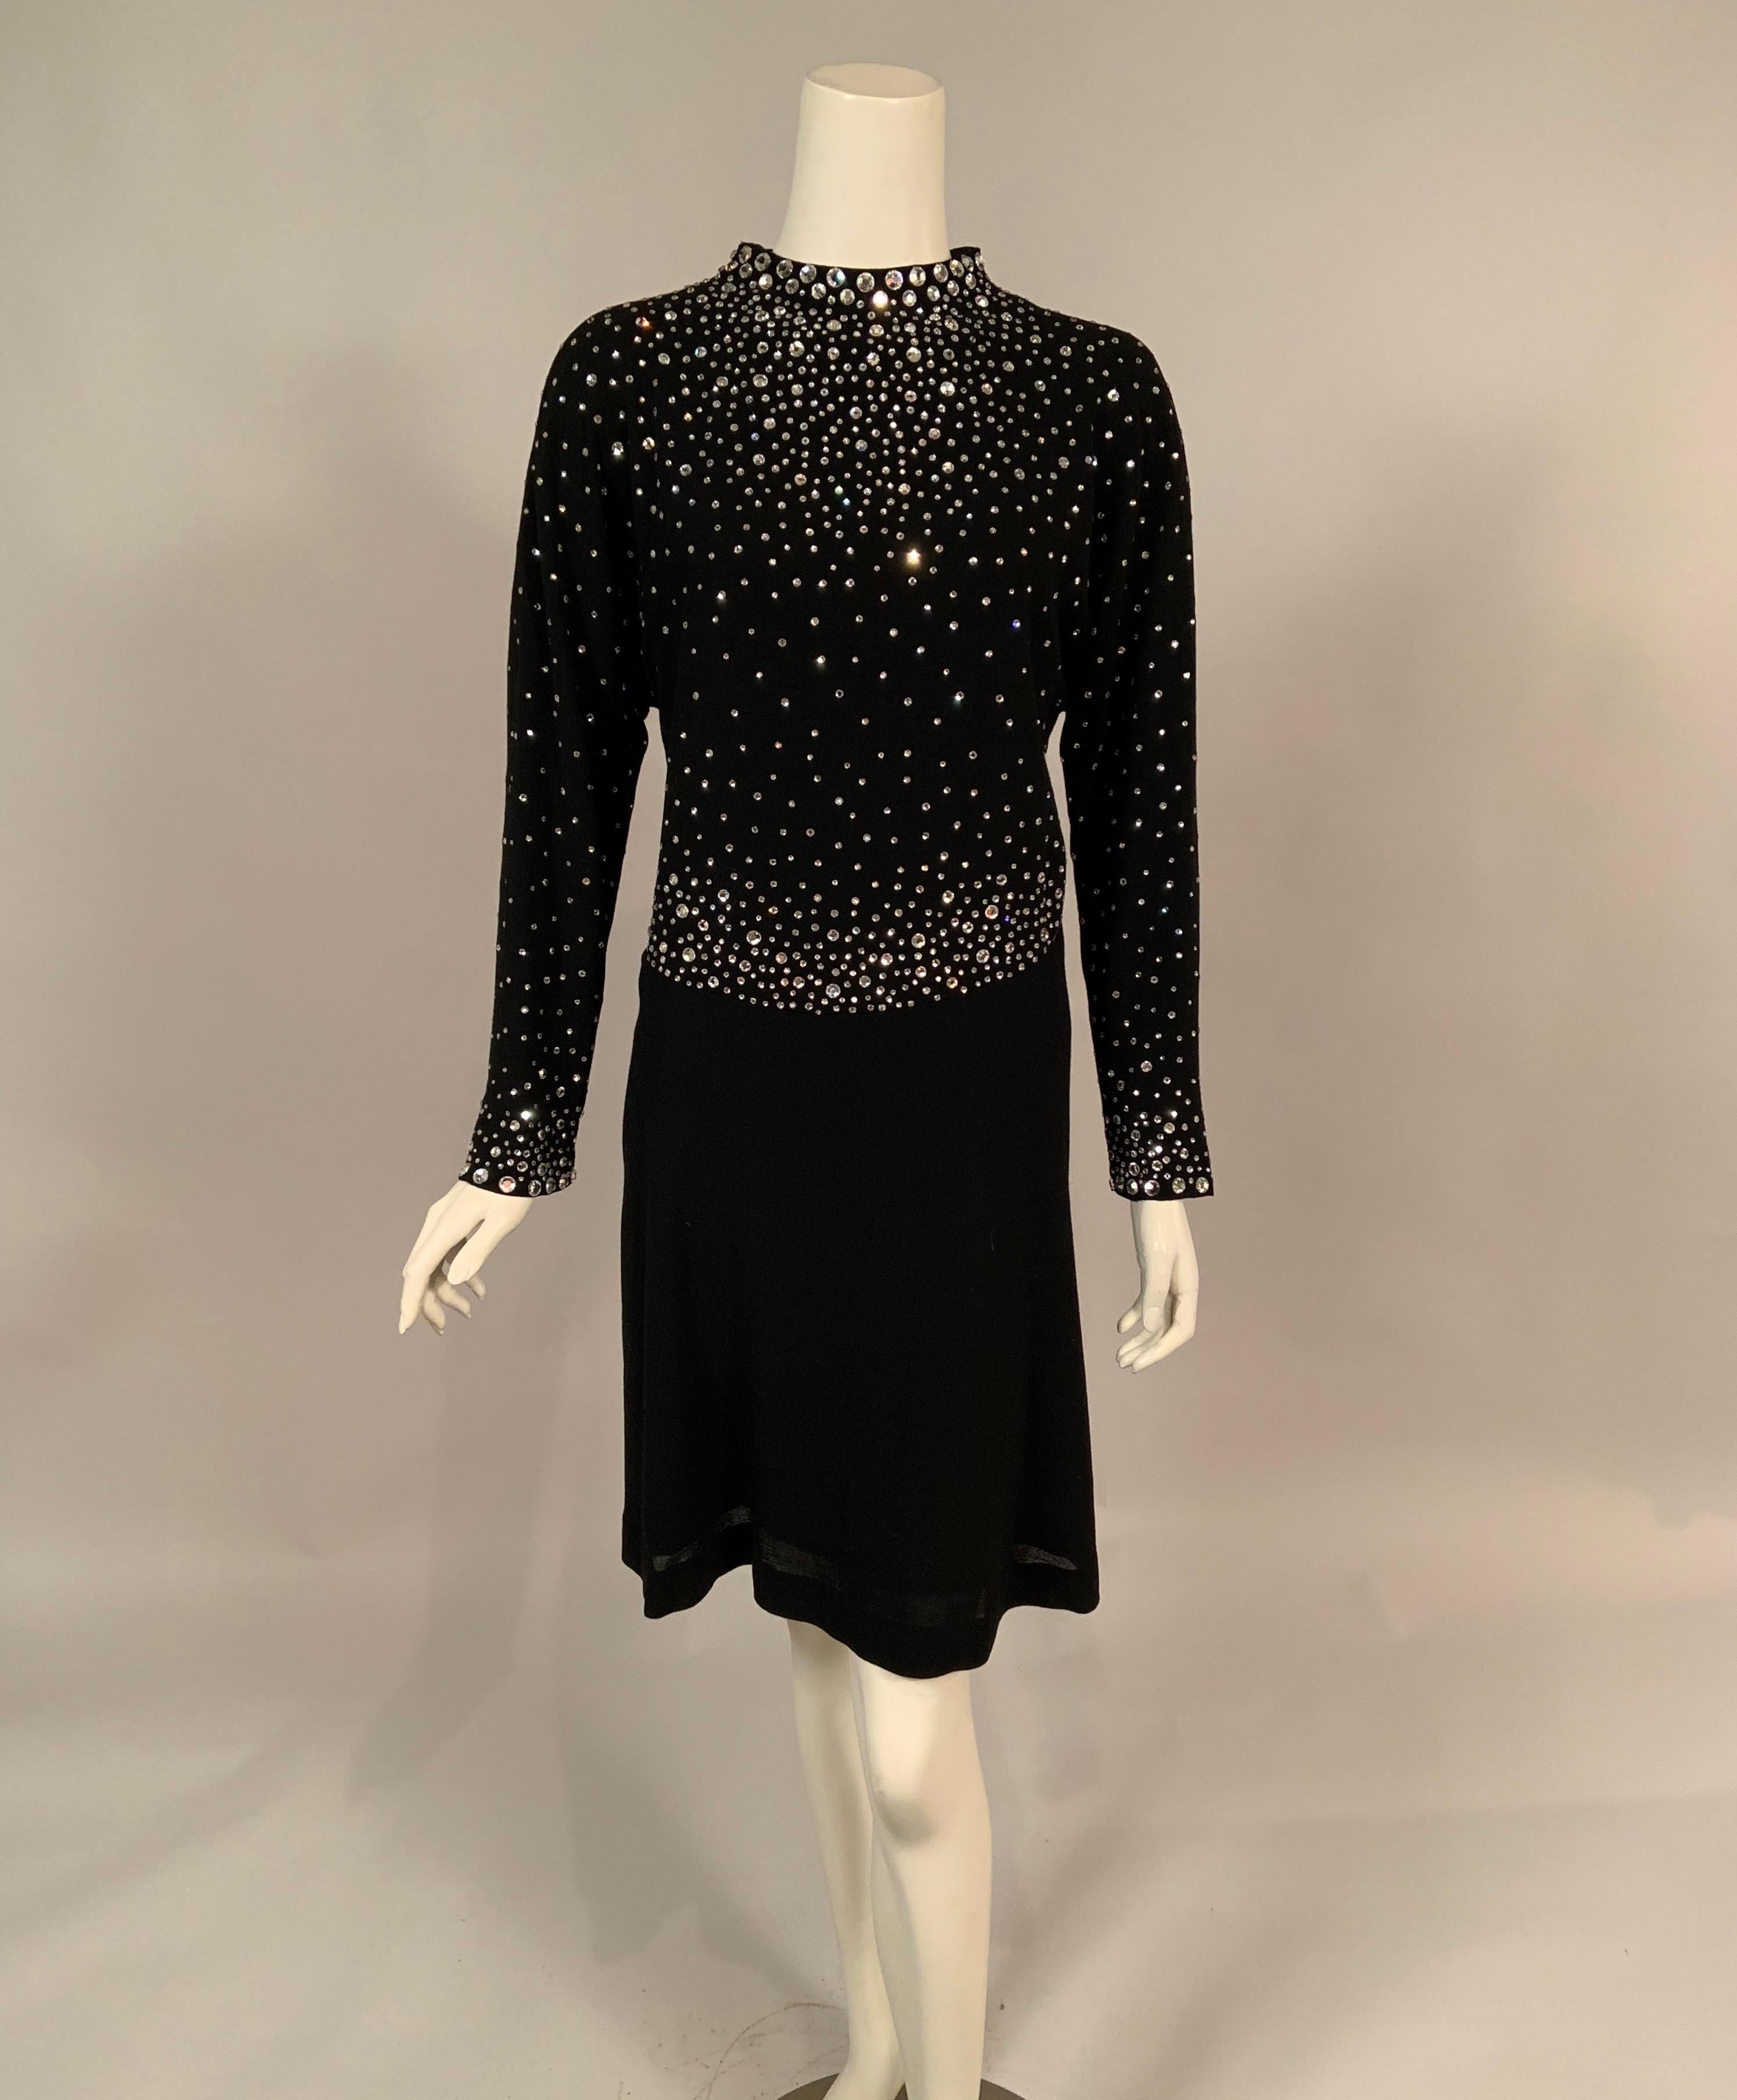 Pauline Trigere loved the look of these prong set rhinestones and used them repeatedly on coats and dresses throughout her career.. This example is a lightweight black wool crepe dress with a round neckline, long sleeves and a center back zipper.